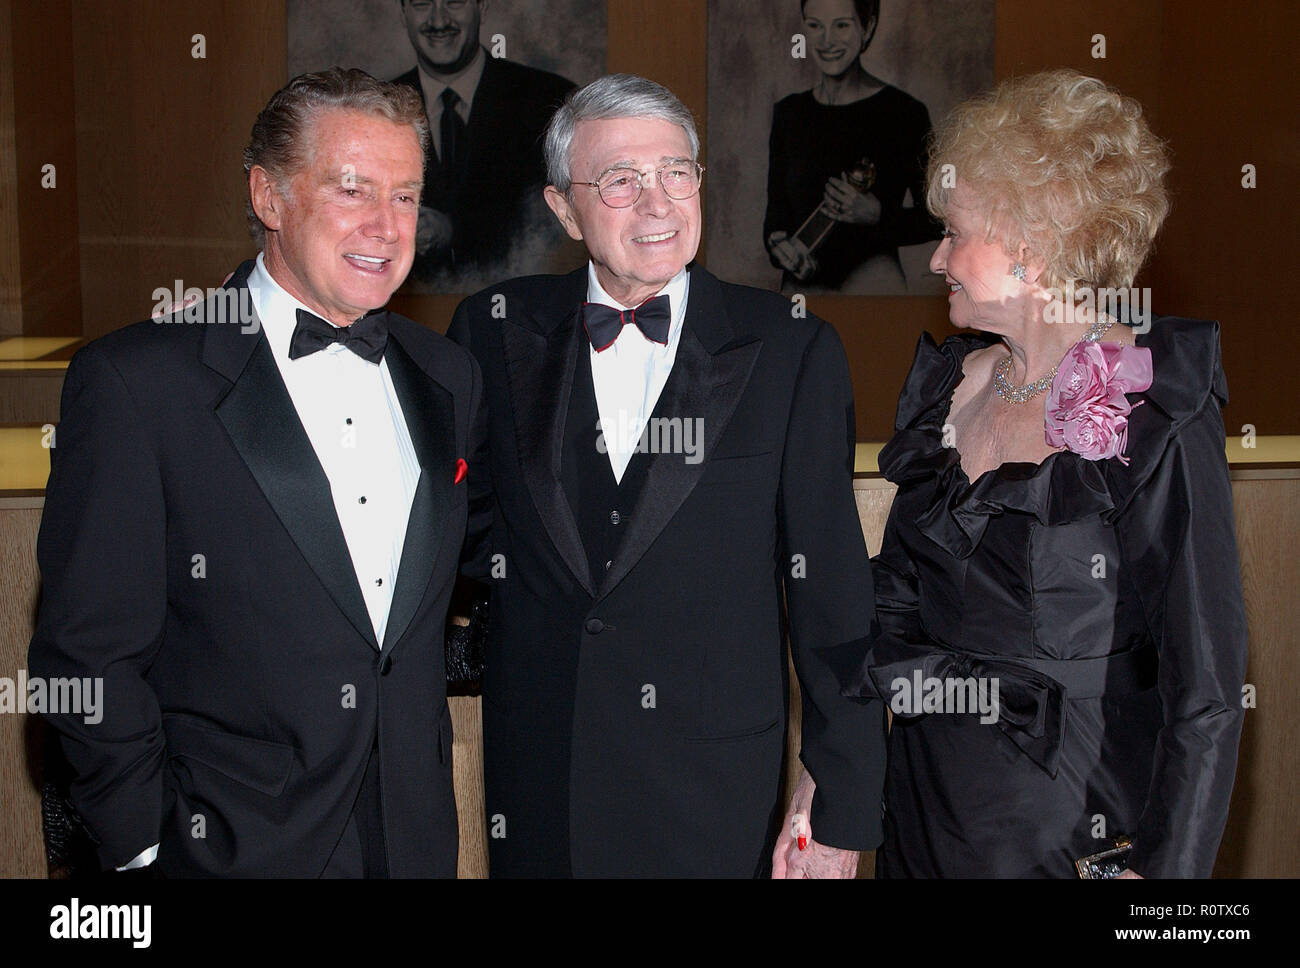 Army Archerd and wife posing with Regis Philbin at the ' Variety Salutes Army Archerd's 50th Anniversary ' at the Beverly Hilton  in Los Angeles. Apri Stock Photo